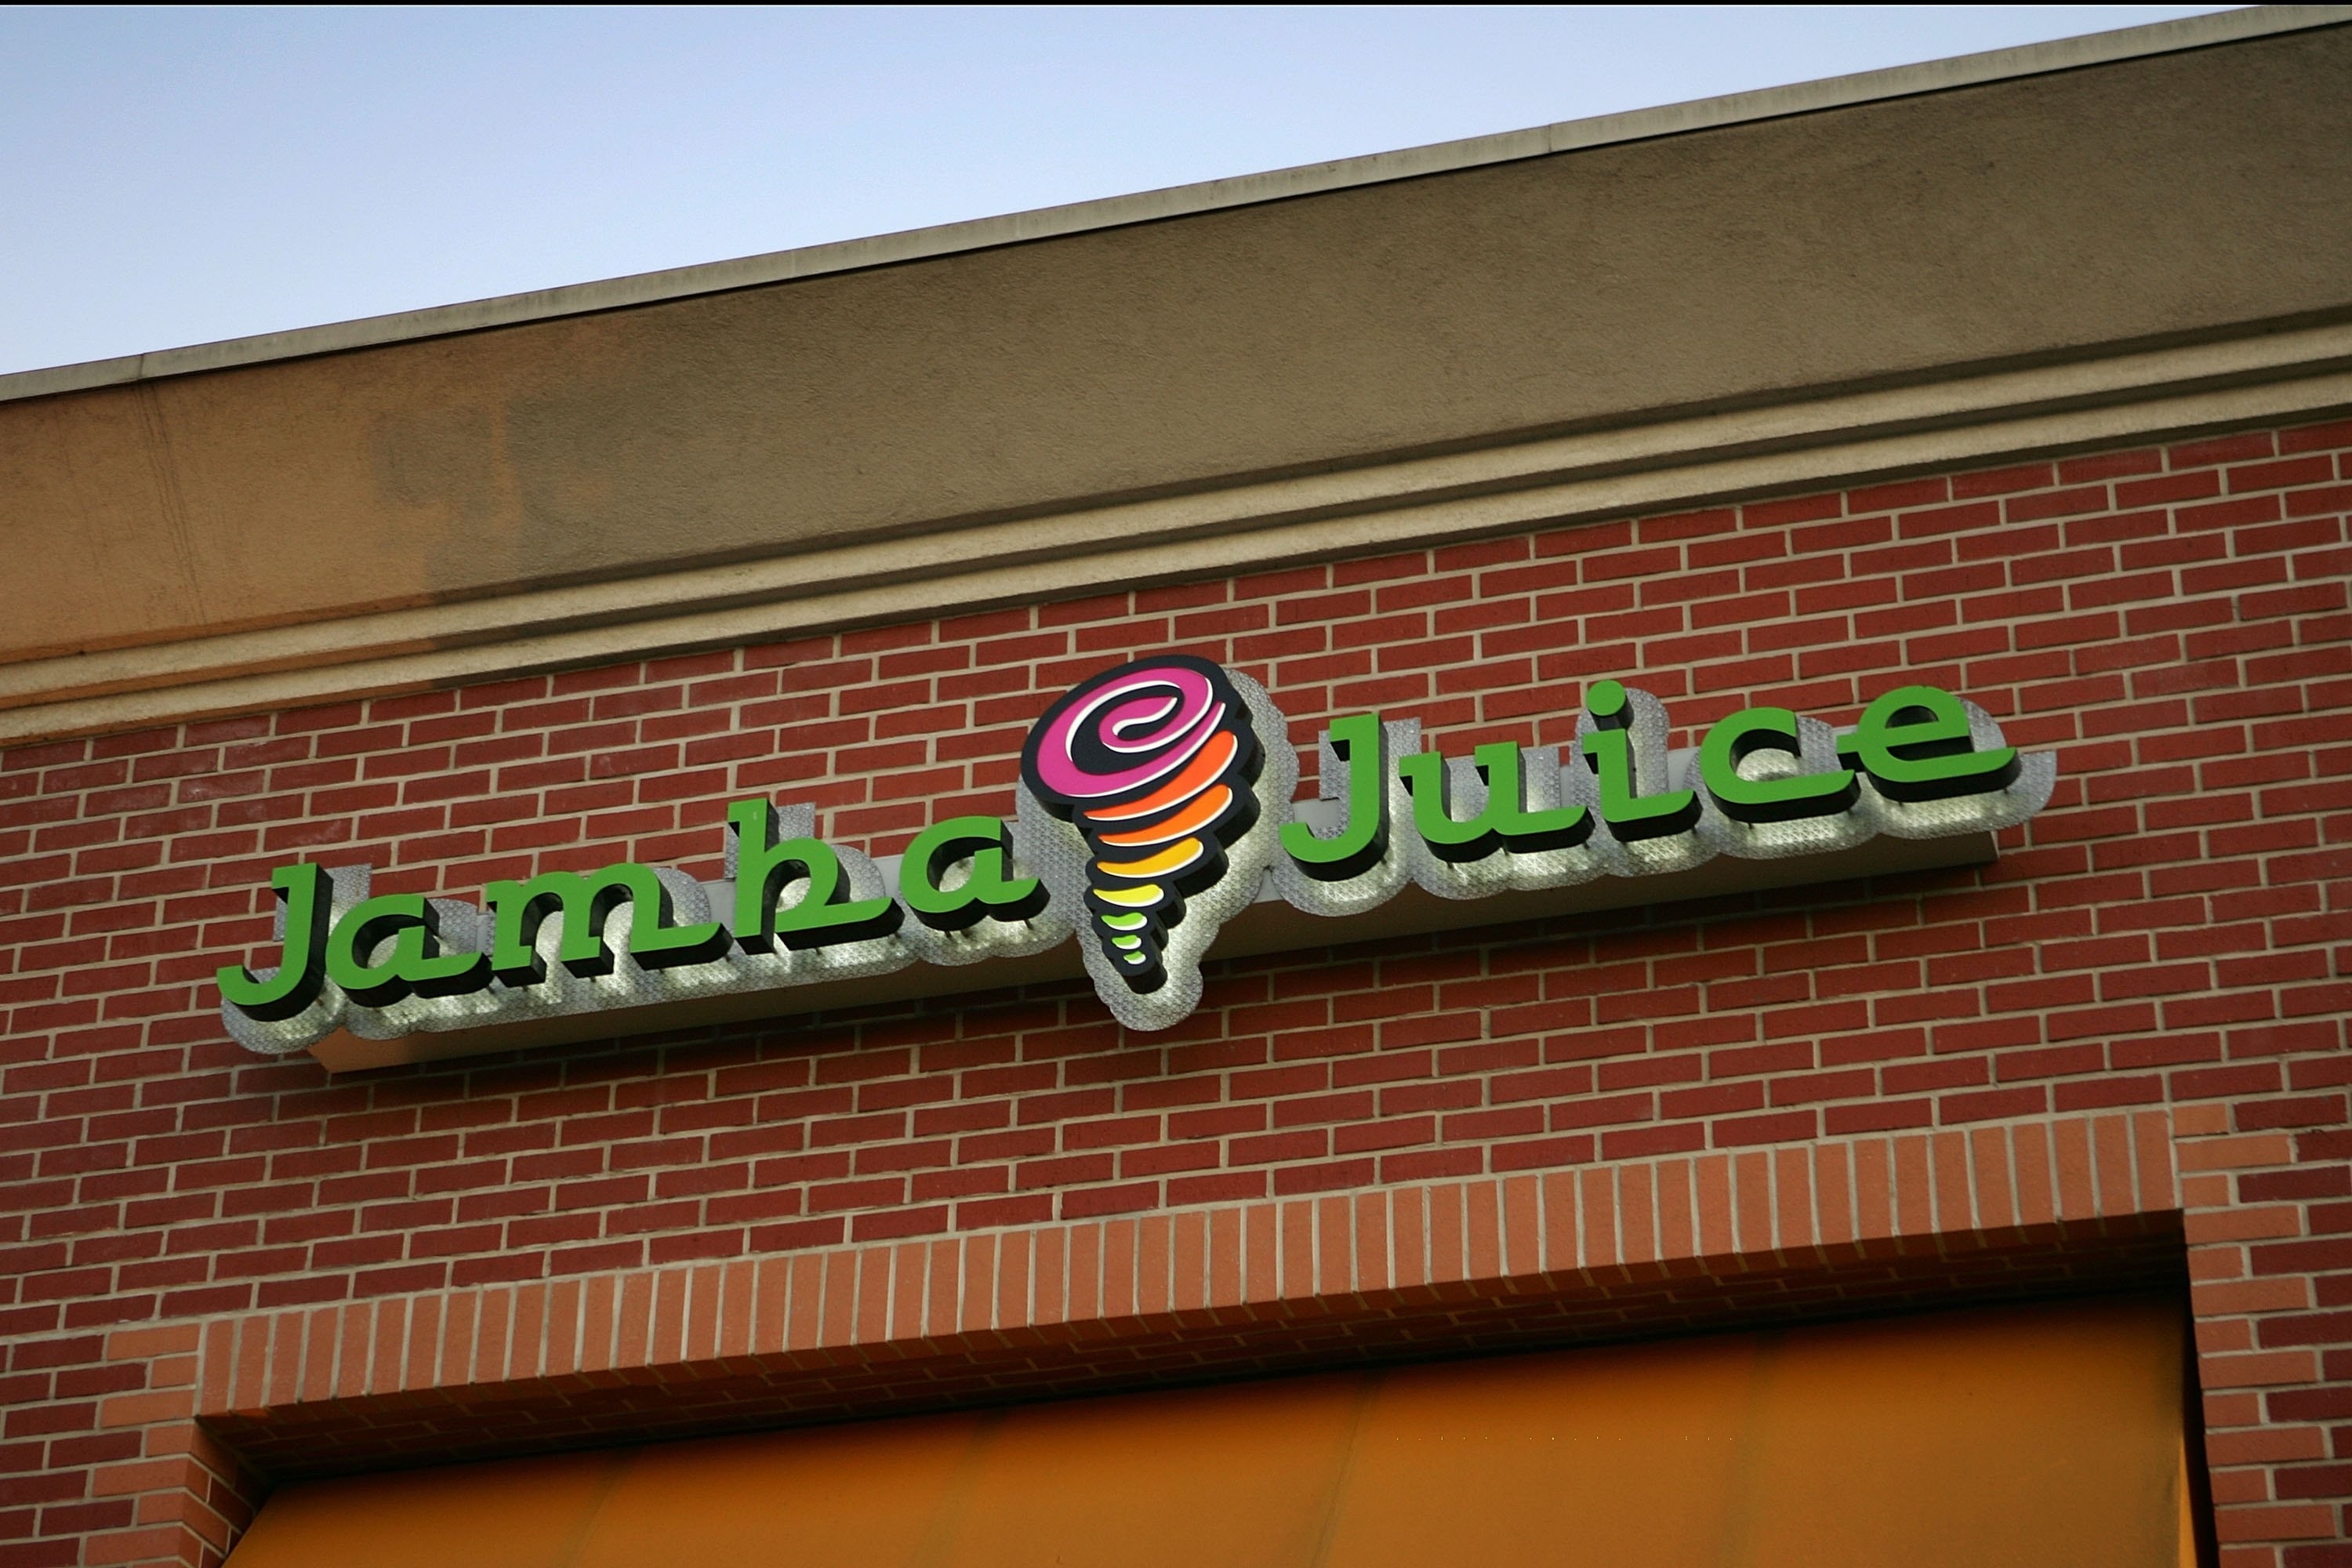 A close-up of the the Jamba Juice sign on a brick building.